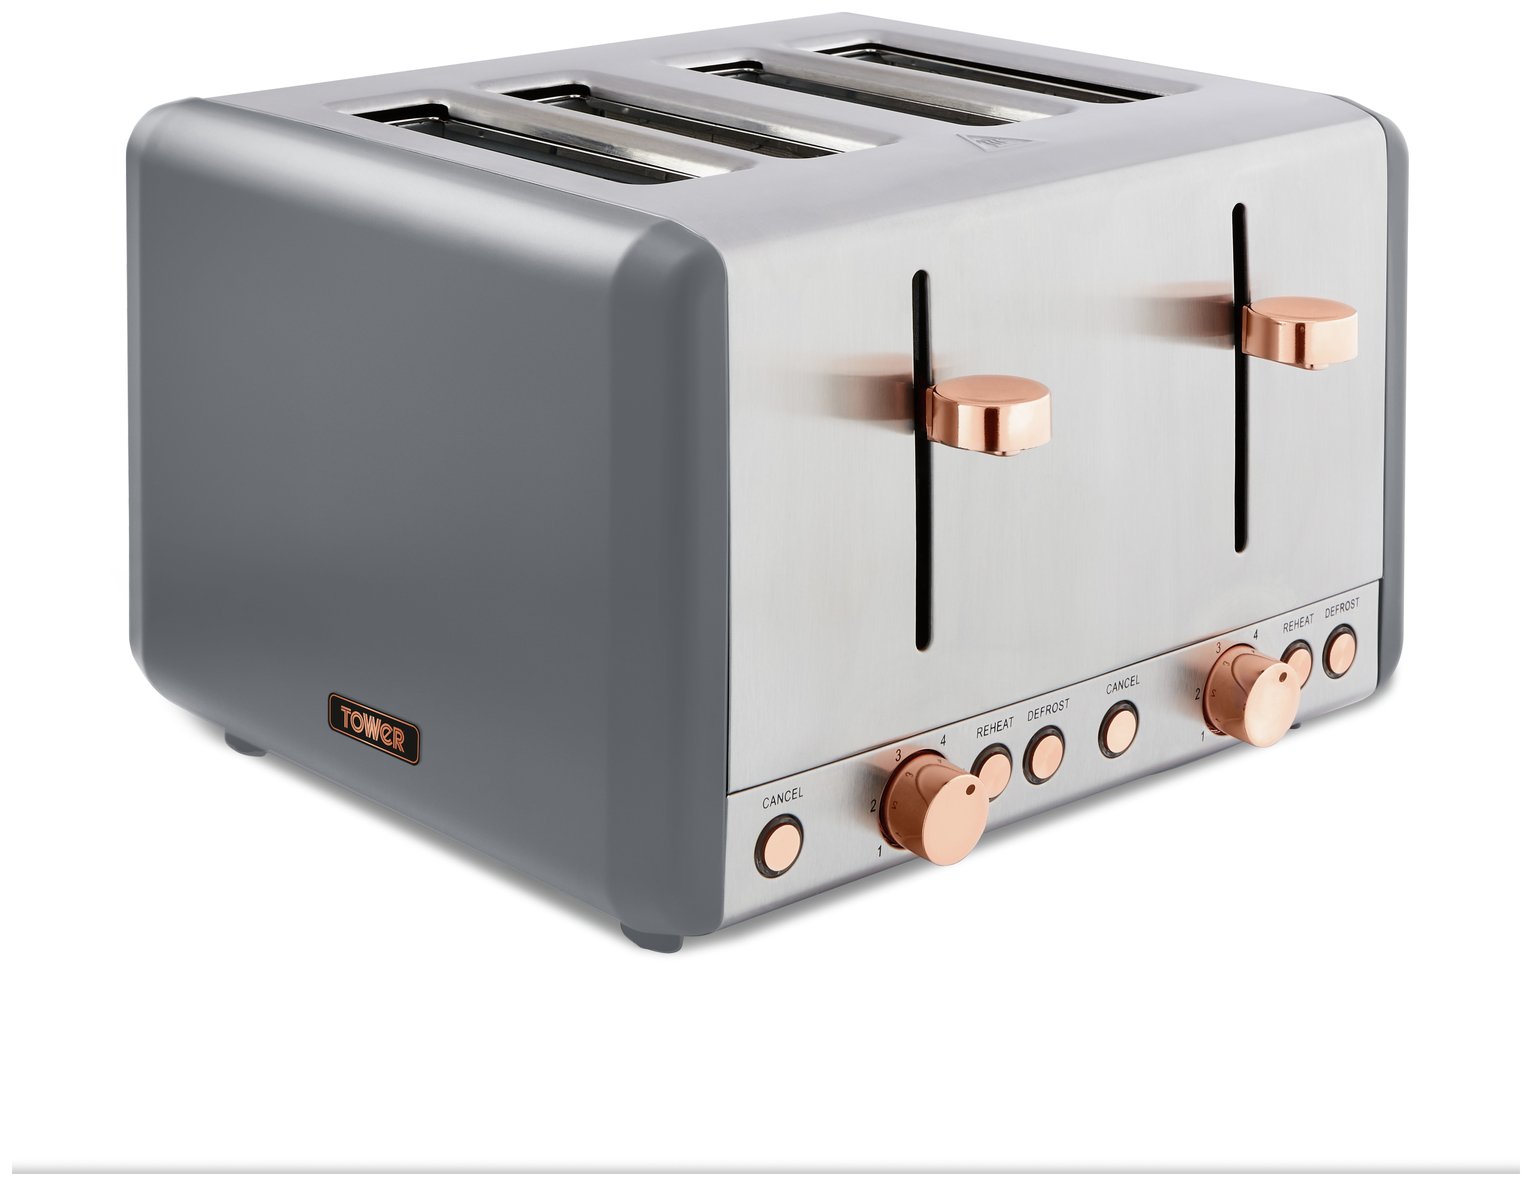 Tower T20051RGG Caveletto 4 Slice Toaster - Grey & Rose Gold